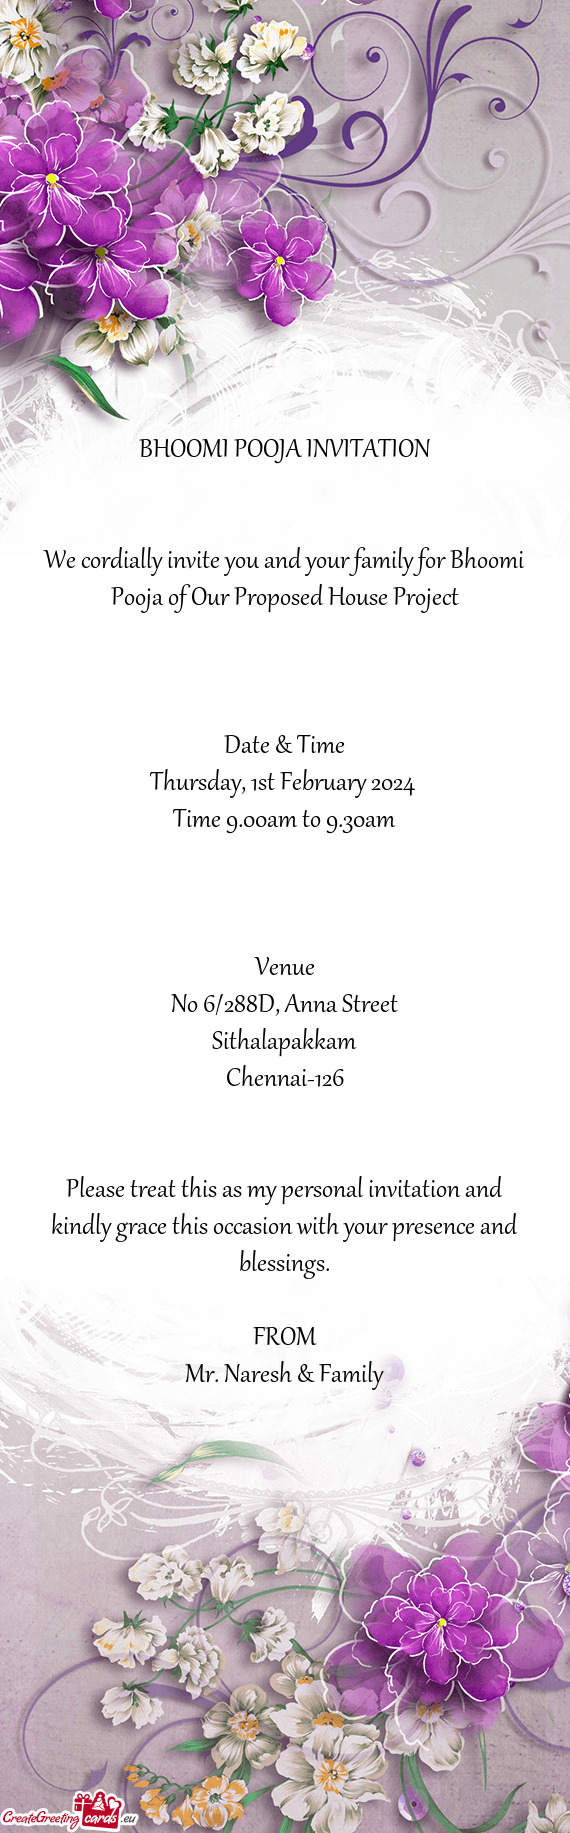 We cordially invite you and your family for Bhoomi Pooja of Our Proposed House Project